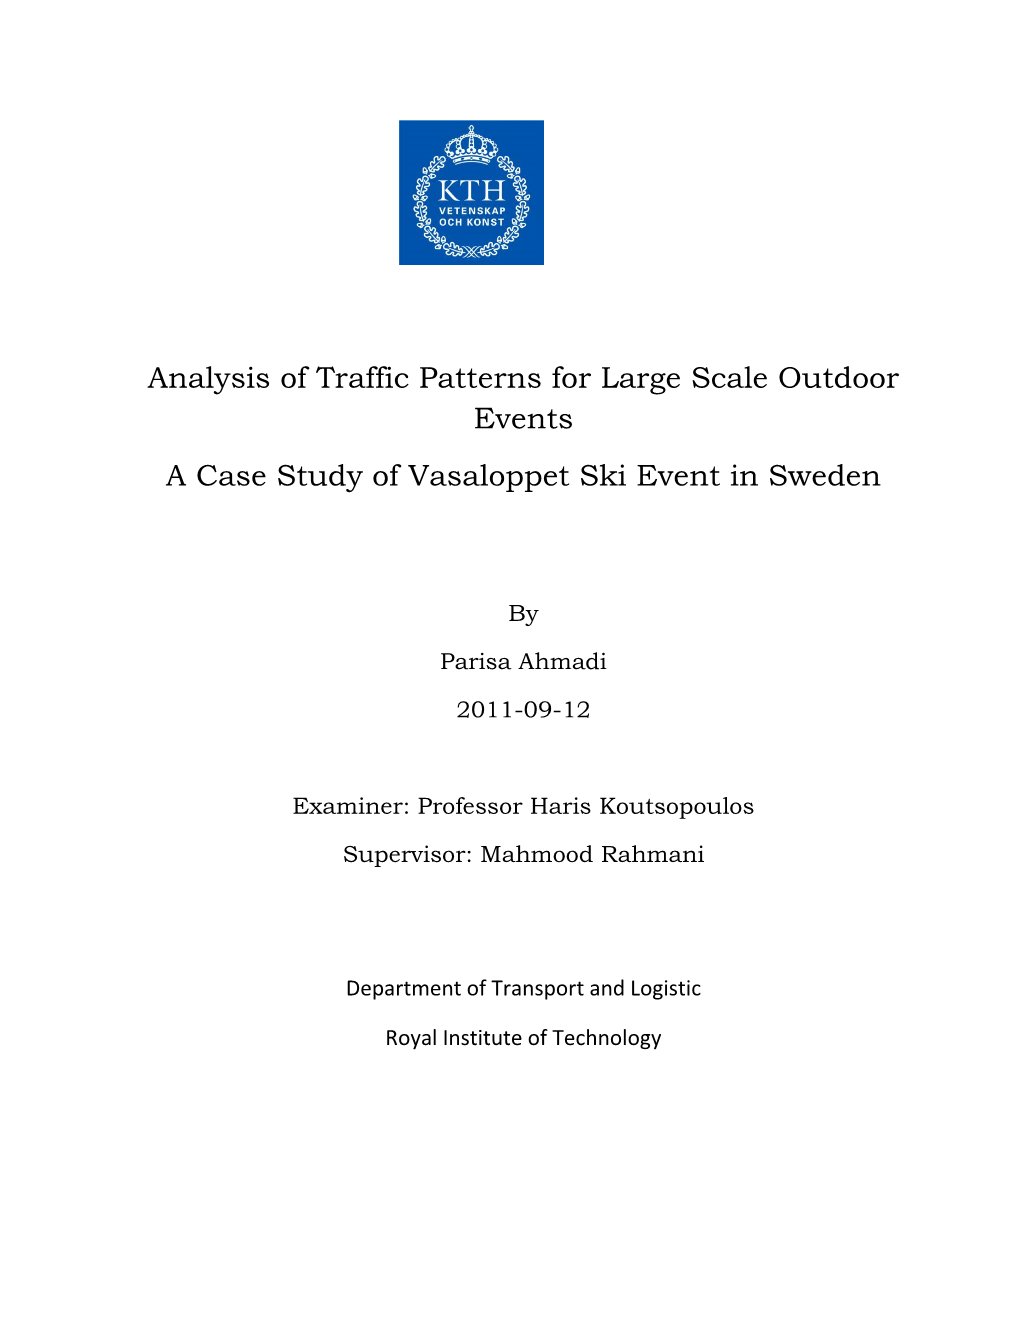 Analysis of Traffic Patterns for Large Scale Outdoor Events a Case Study of Vasaloppet Ski Event in Sweden